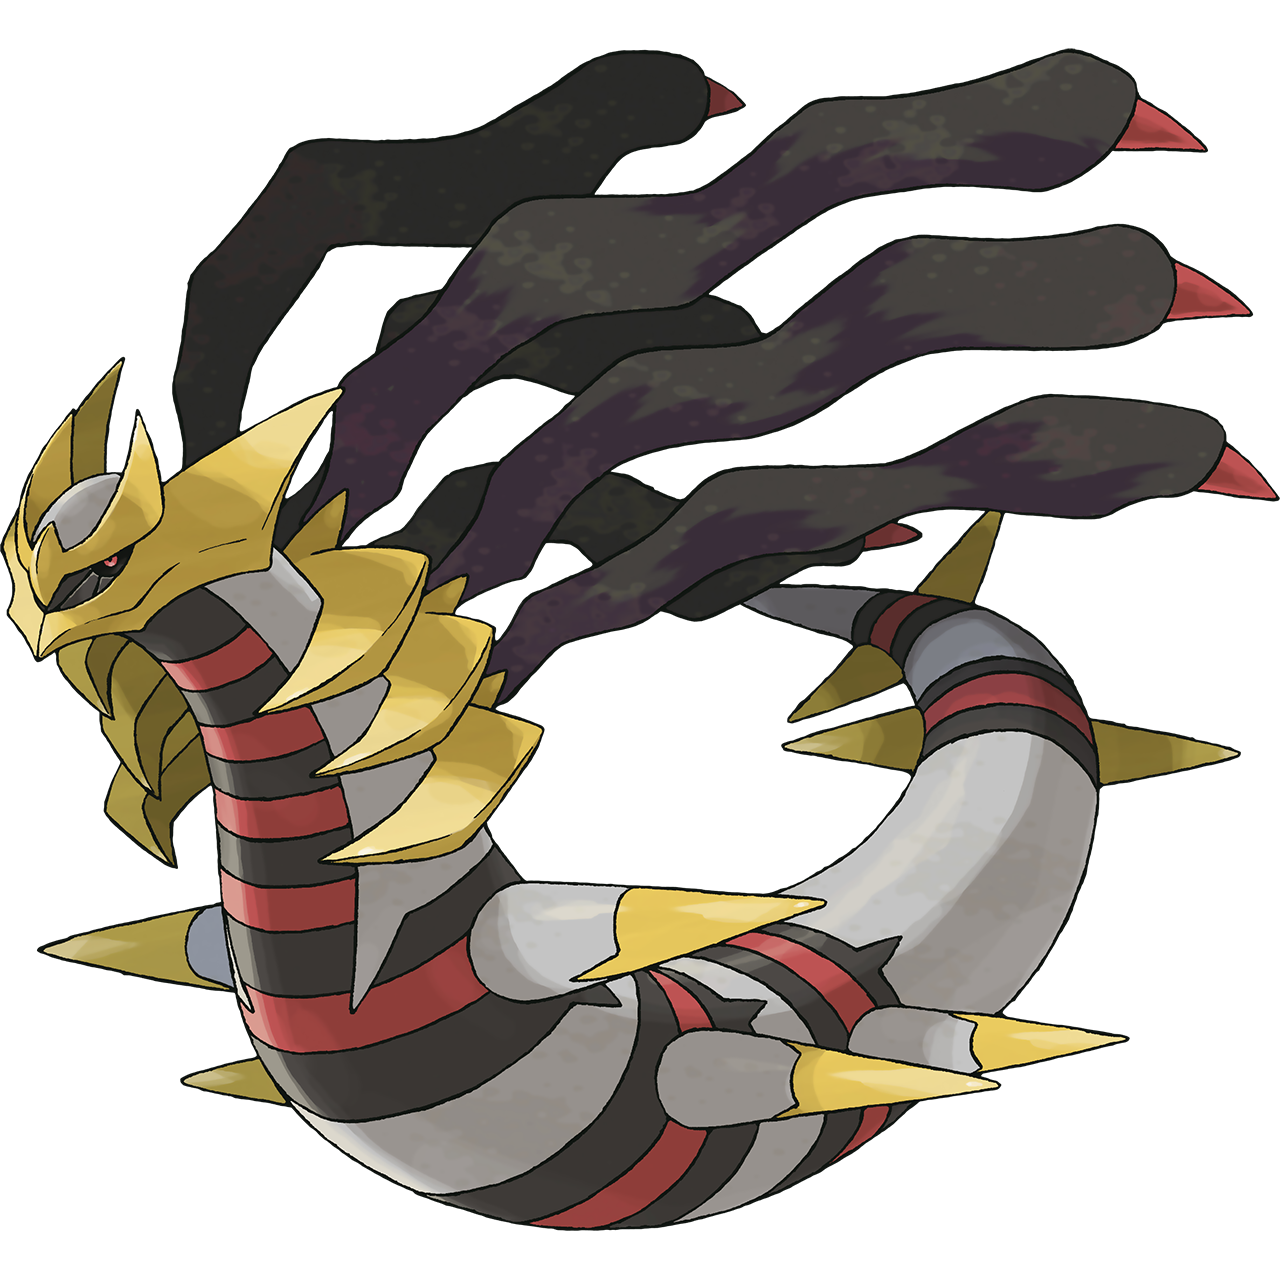 Pokemon Legends Arceus guide: How to catch Giratina, change formes